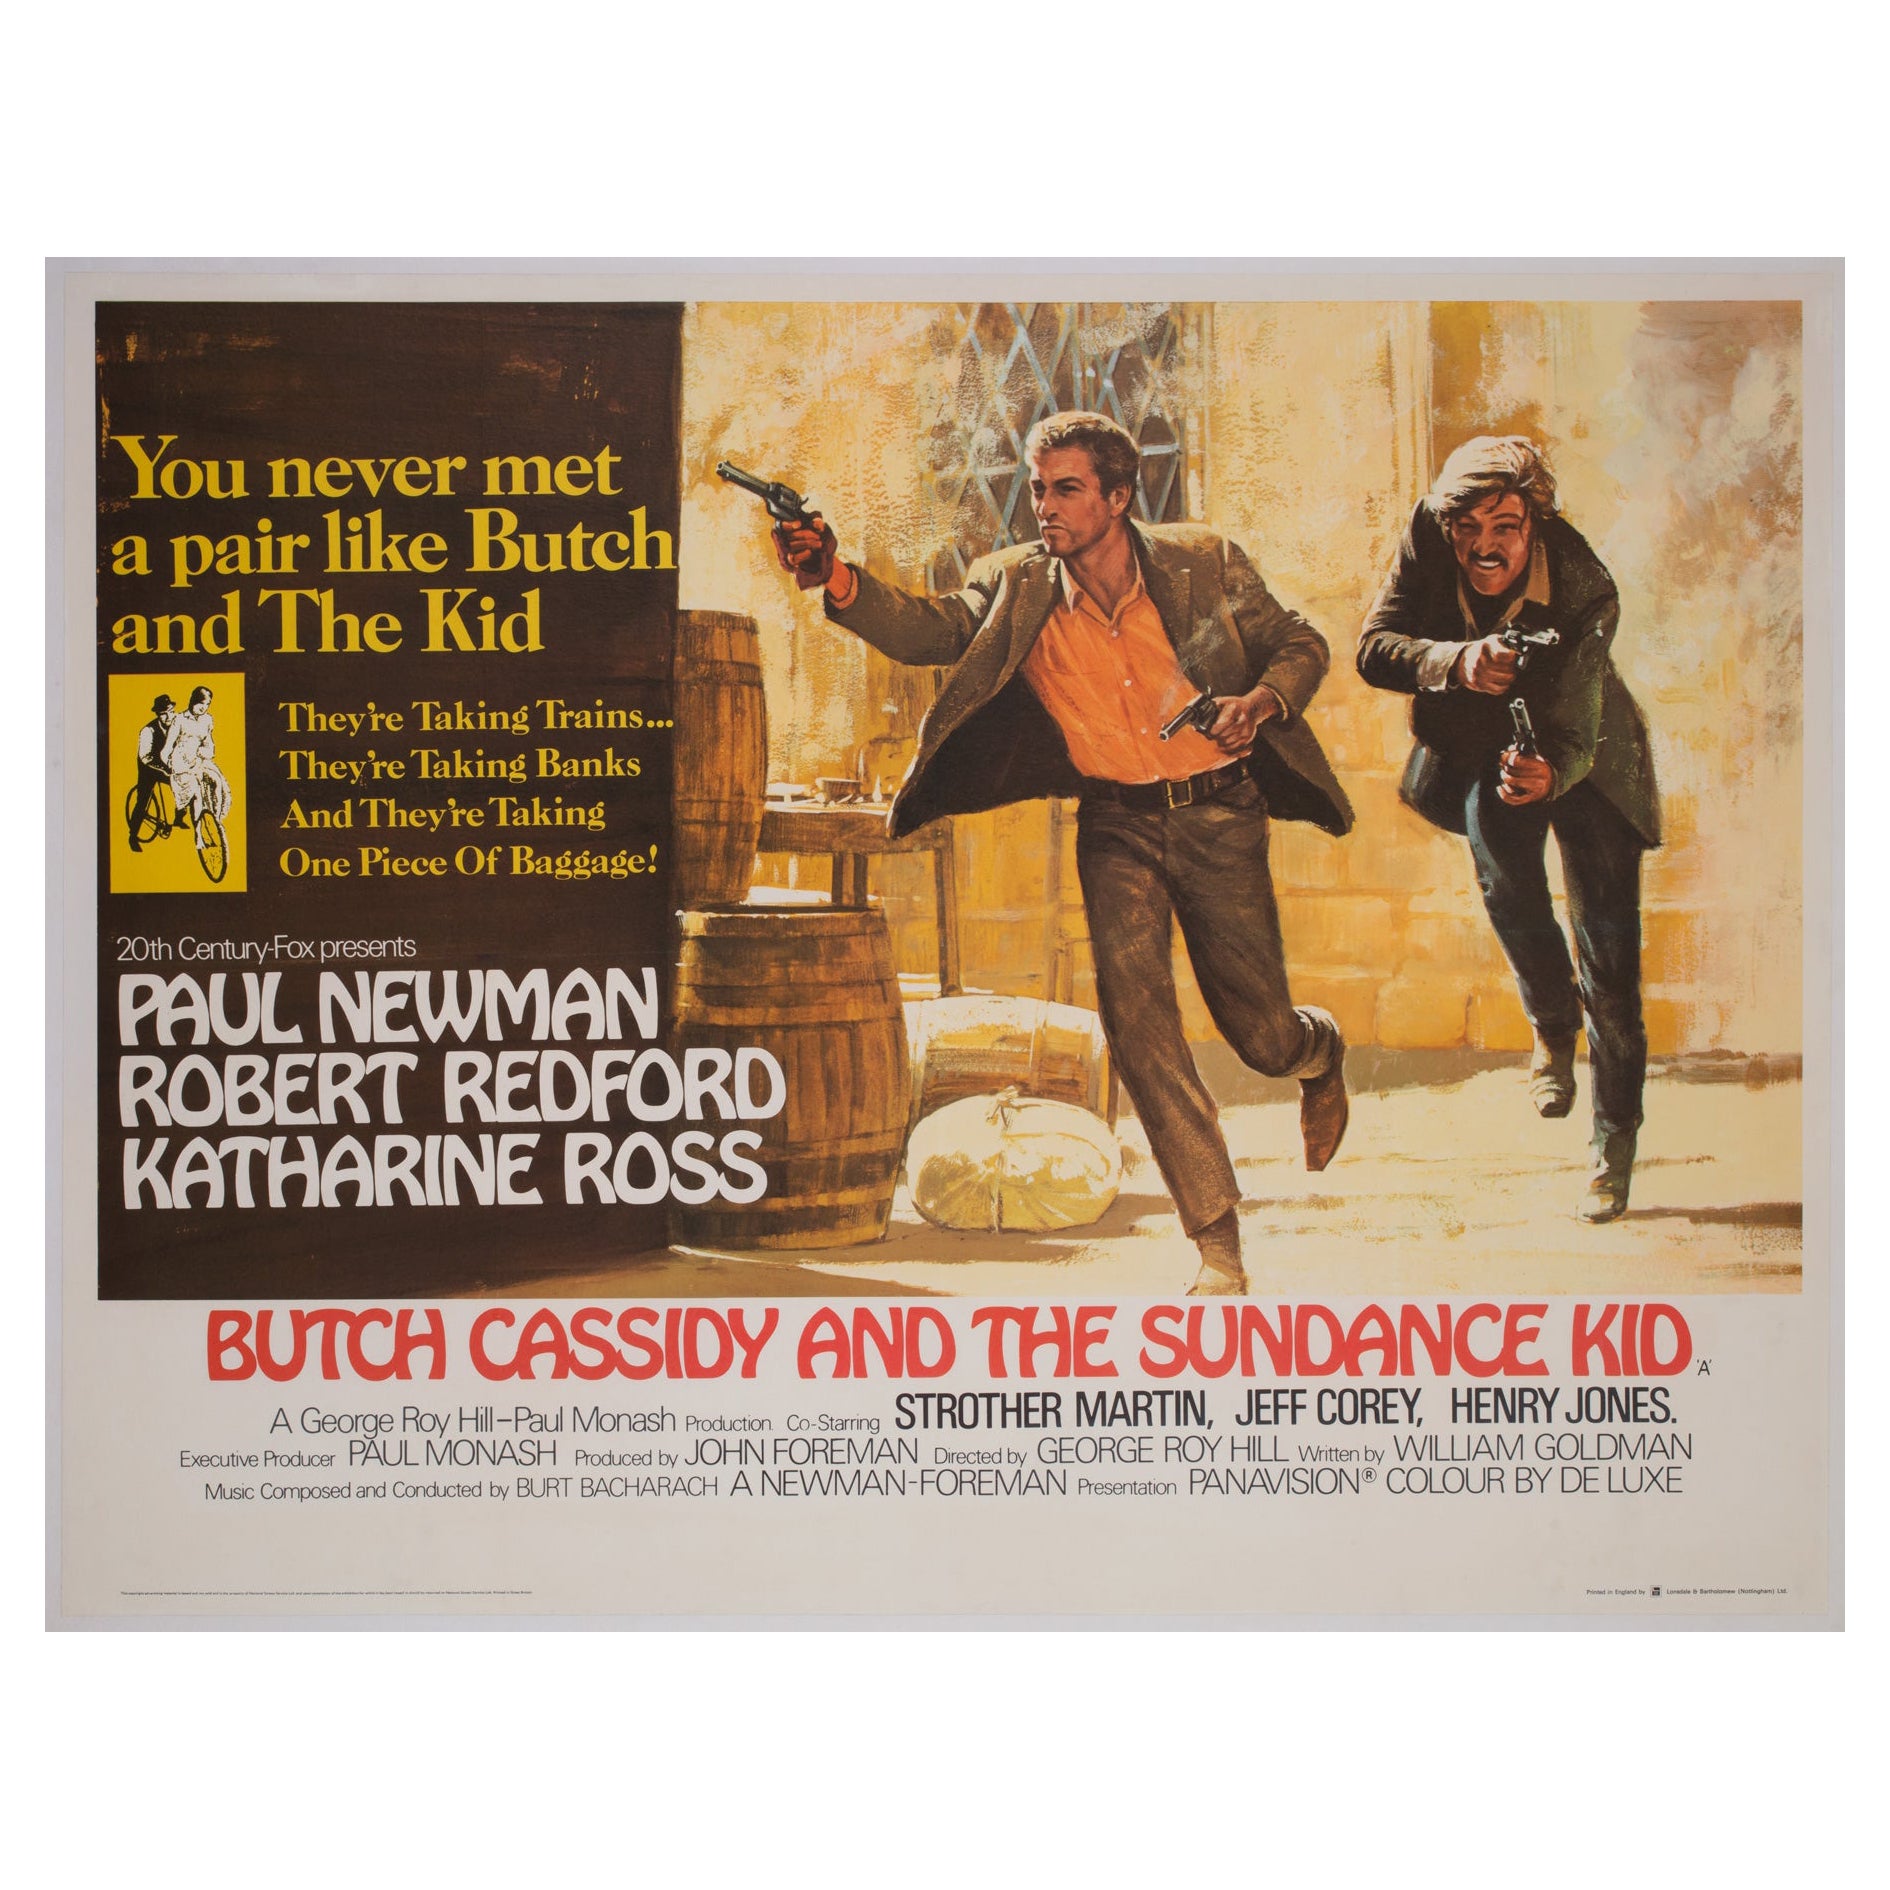 Butch Cassidy and the Sundance Kid UK Film Movie Poster, Tom Beauvais, 1969 For Sale